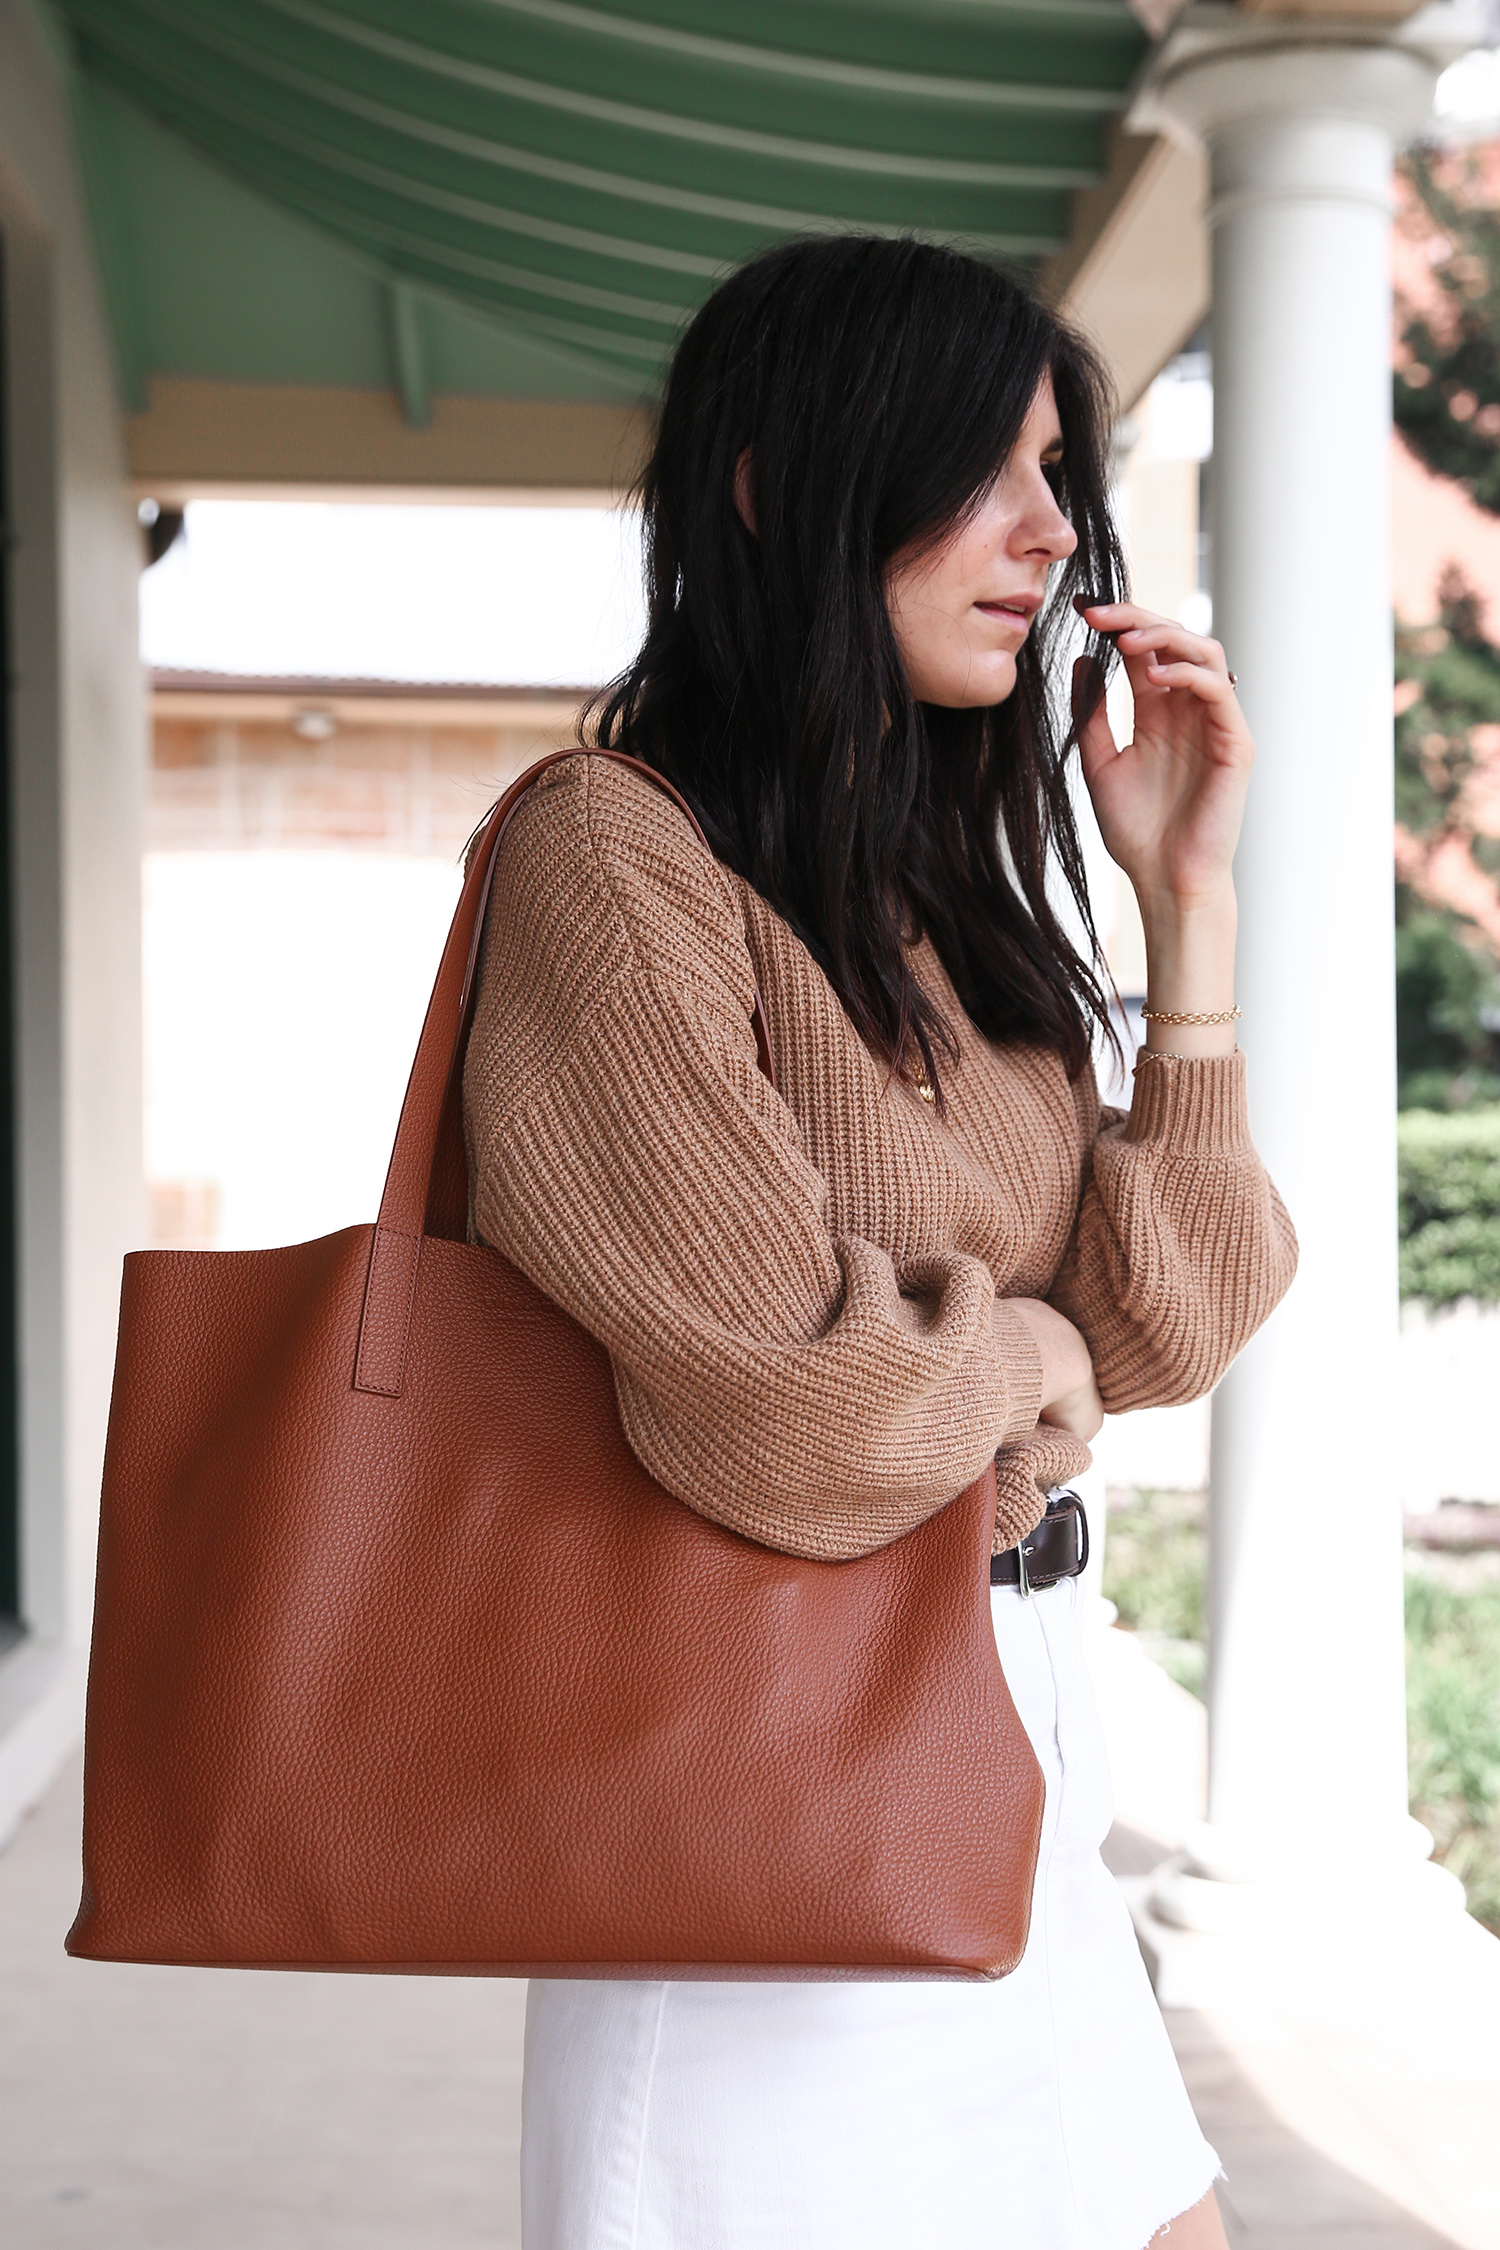 Everlane Soft Day Tote Review | Mademoiselle | A Minimalist Fashion Blog